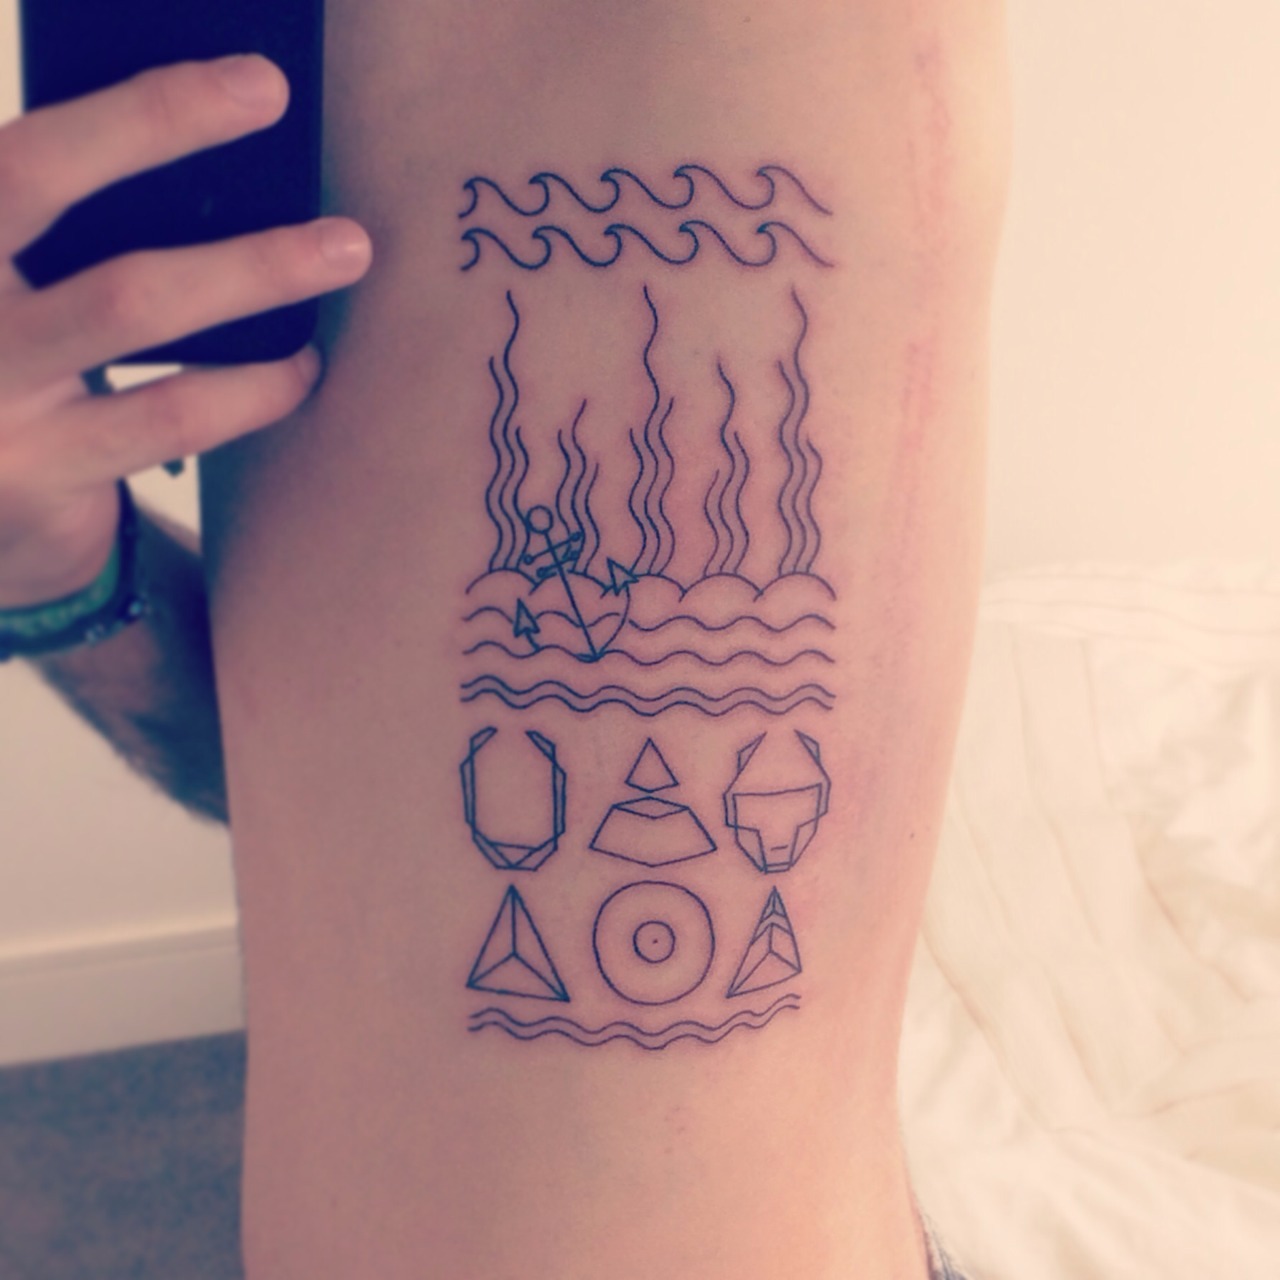  — My first tattoo ever done by Rin at Kaleidoscope...